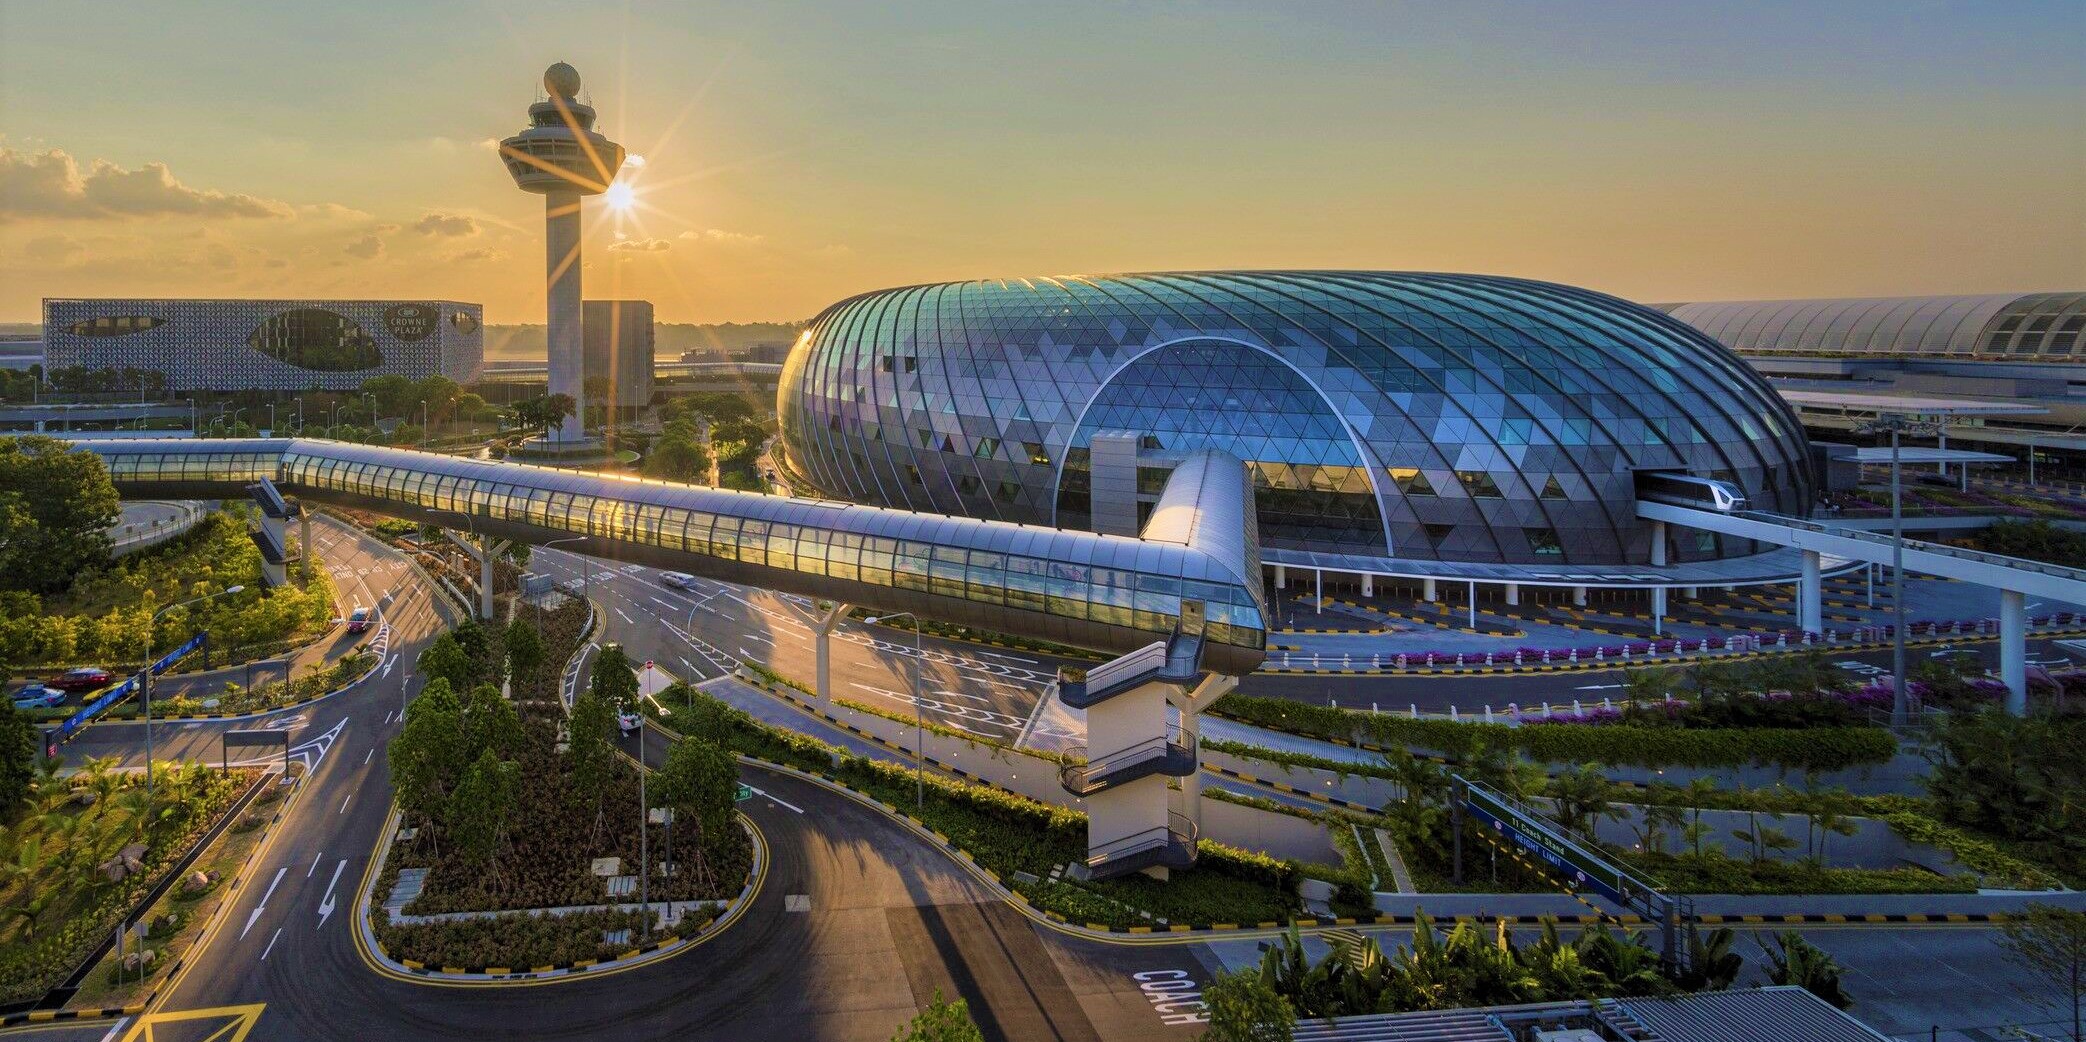 Changi  Aviation  Summit (CAS)  will  host  More  than  300  global aviation leaders ,  policy makers  and  senior aviation executives  from  over  45 countries ! 